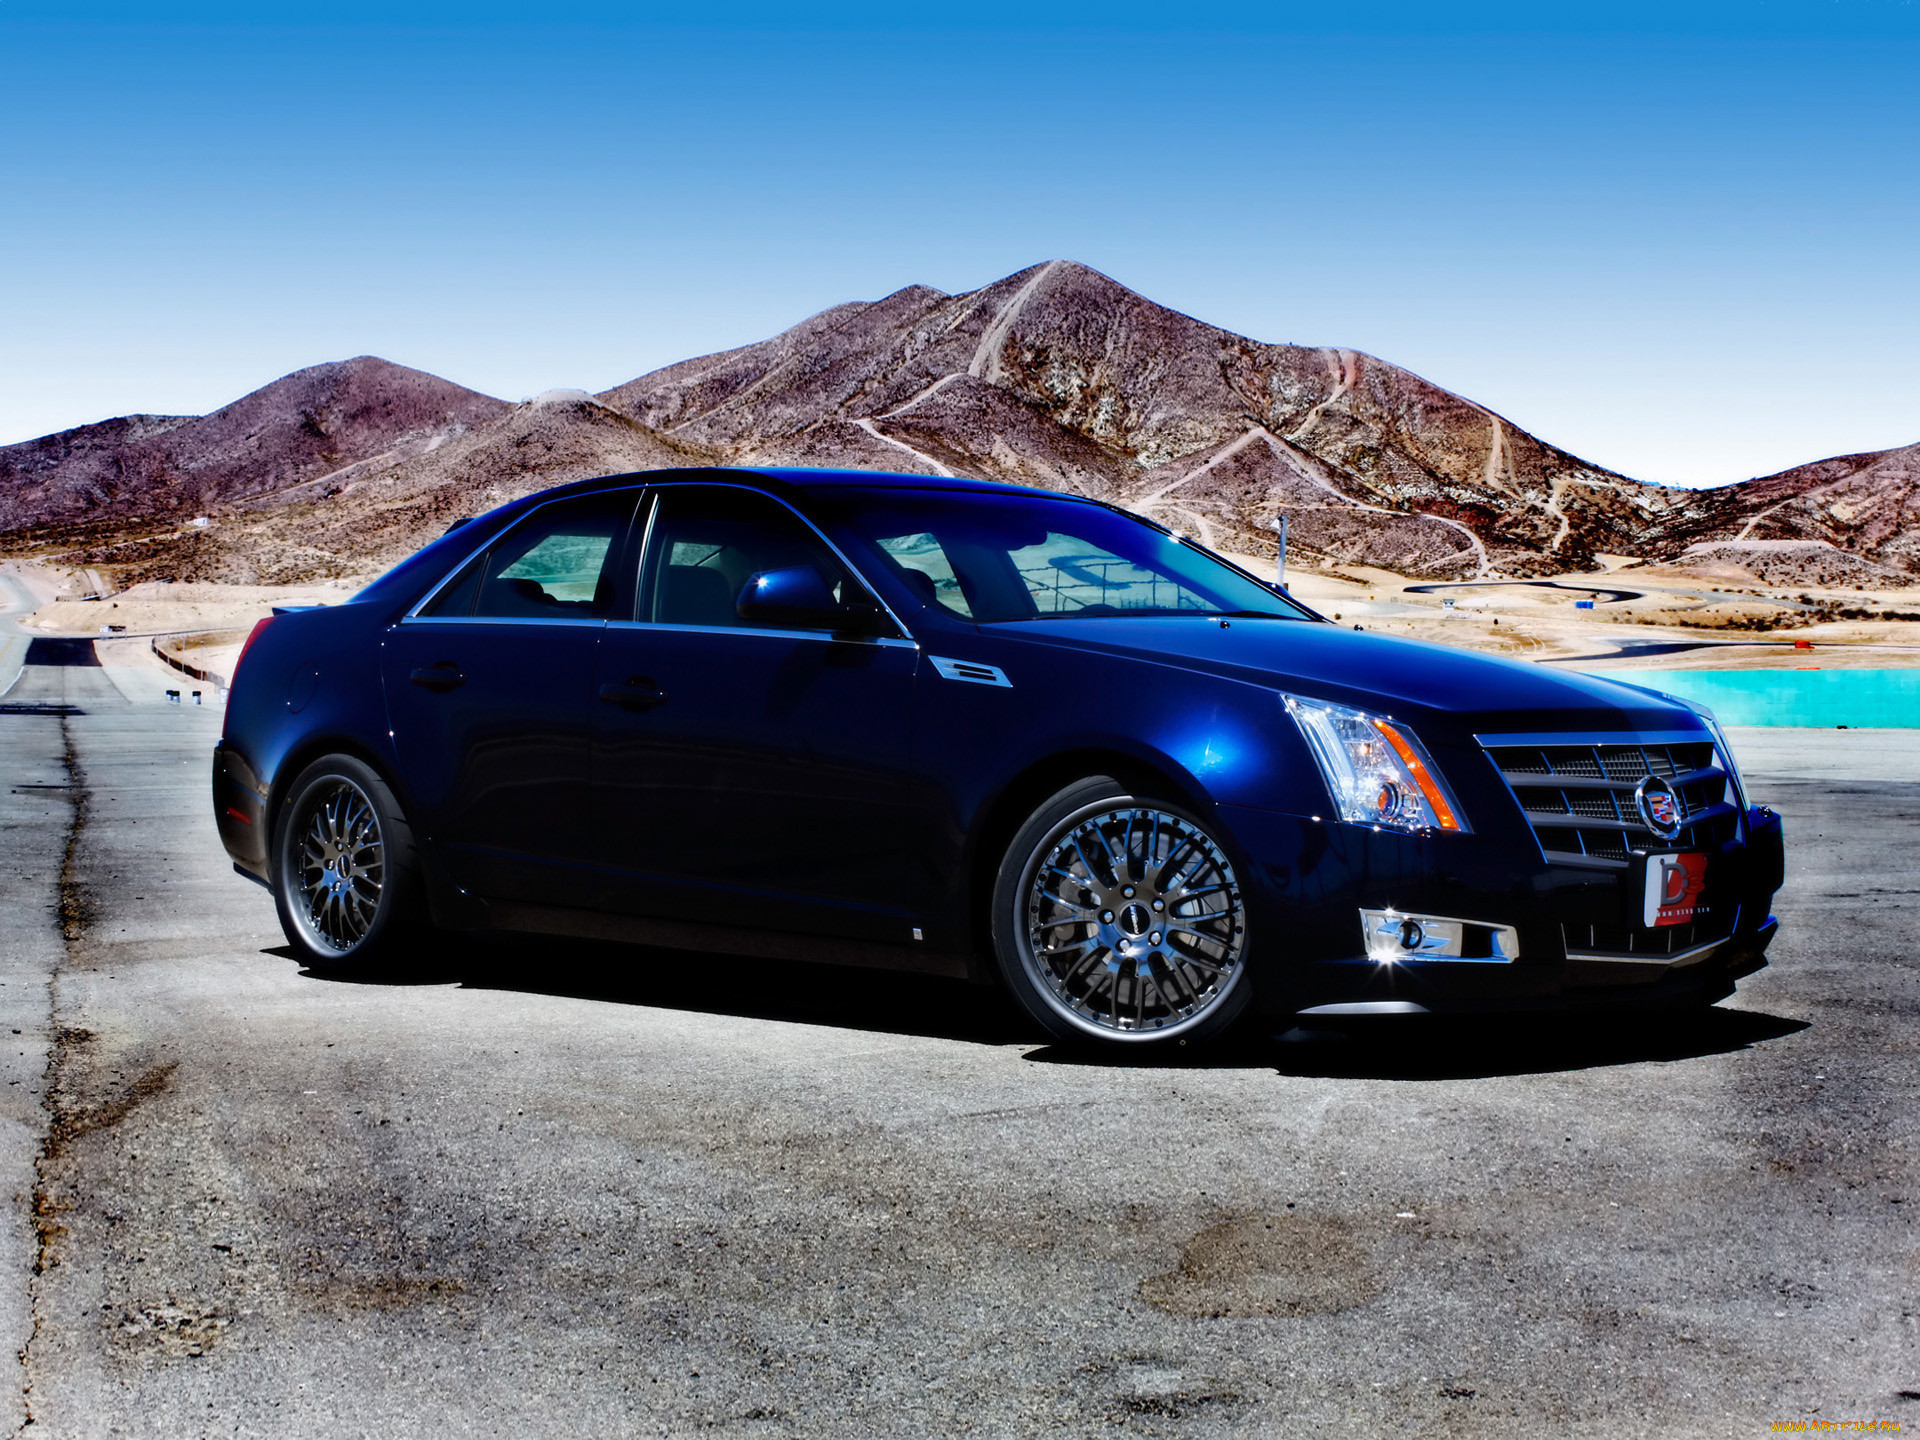 2008, d3, cadillac, cts, track, 